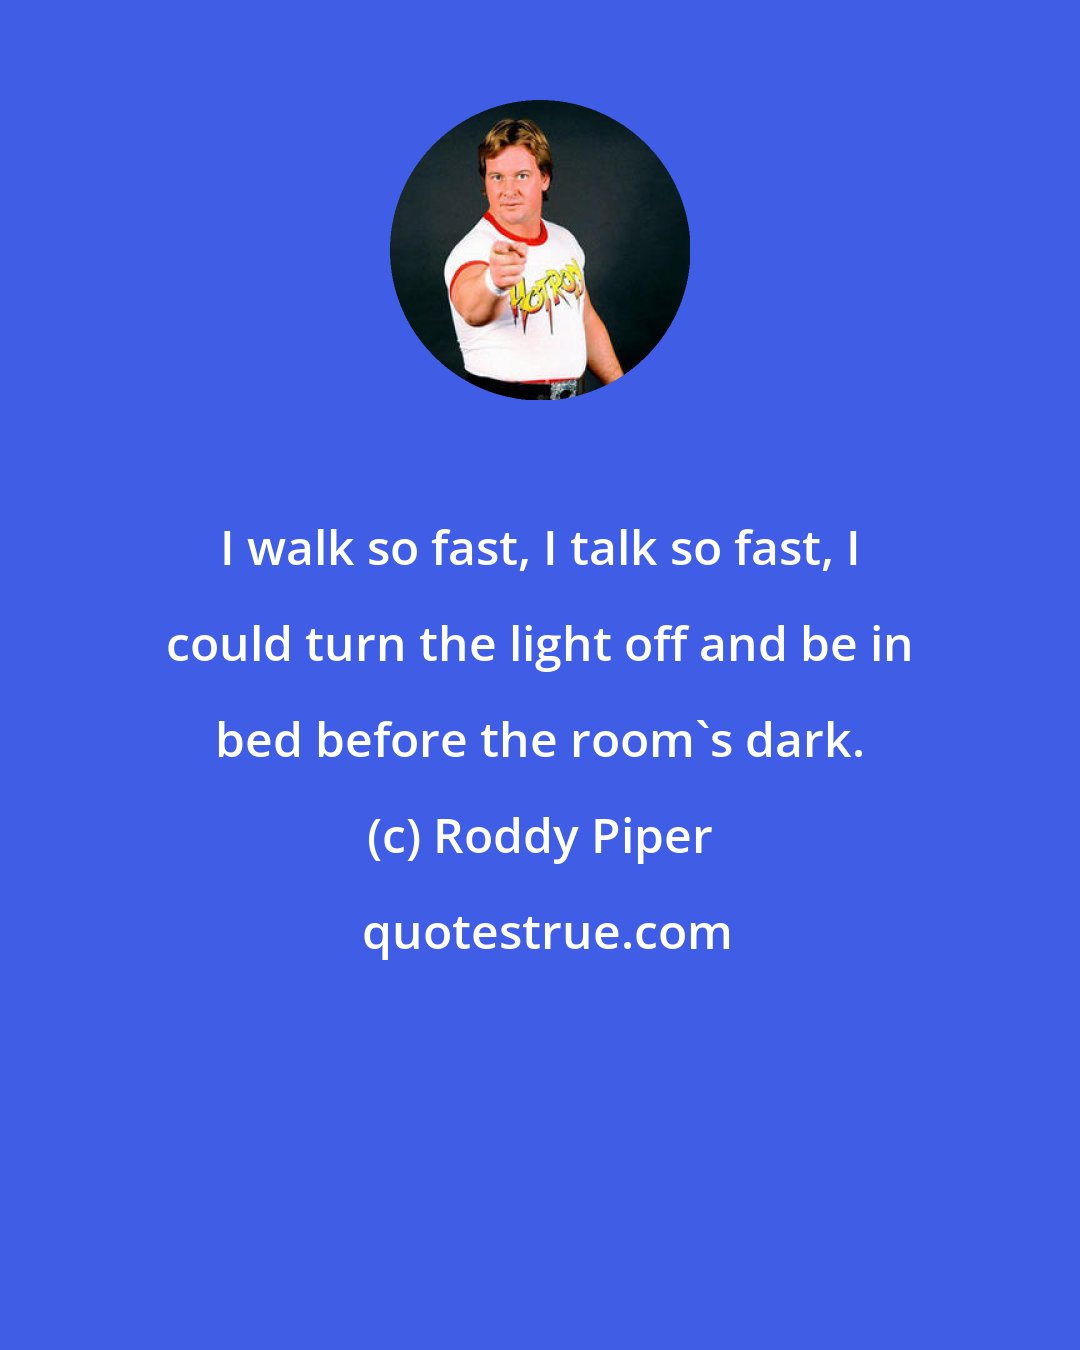 Roddy Piper: I walk so fast, I talk so fast, I could turn the light off and be in bed before the room's dark.